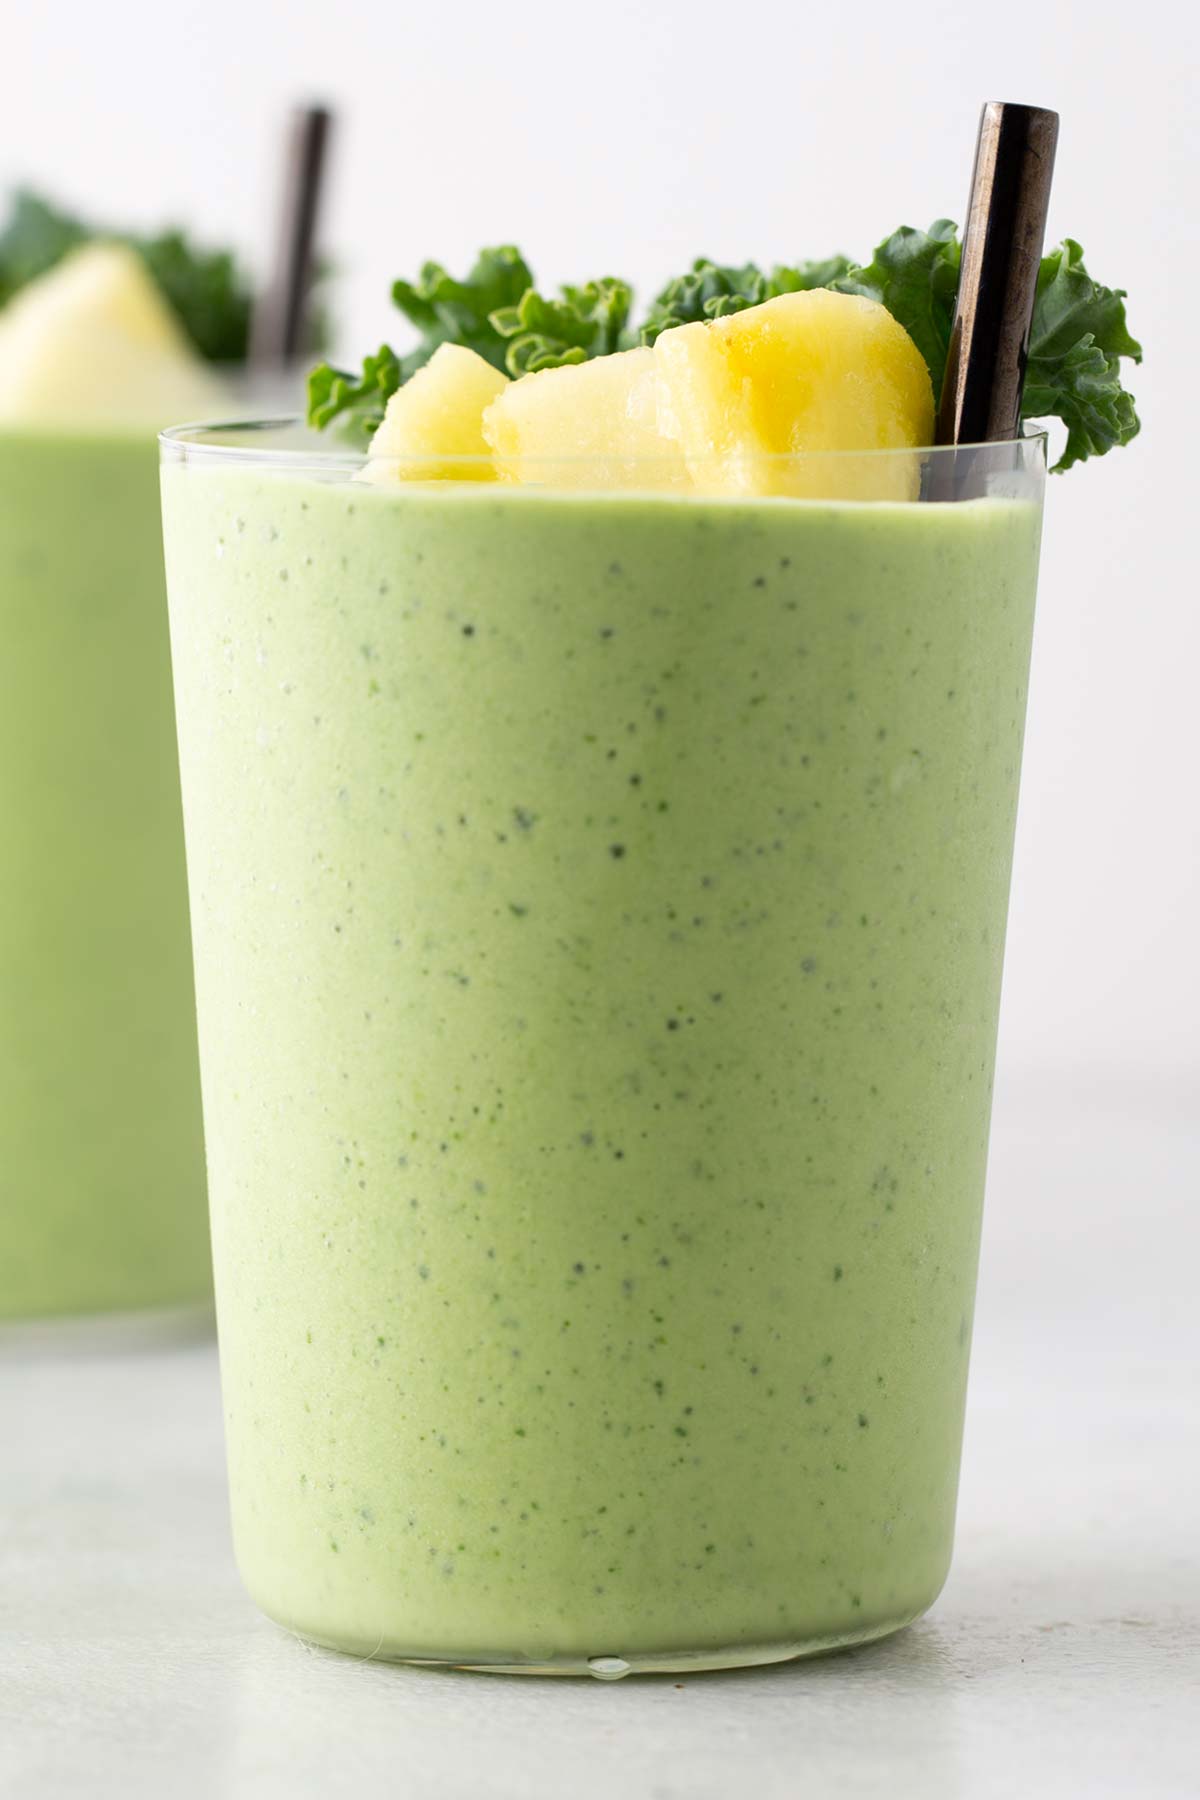 Kale pineapple smoothie in a glass.